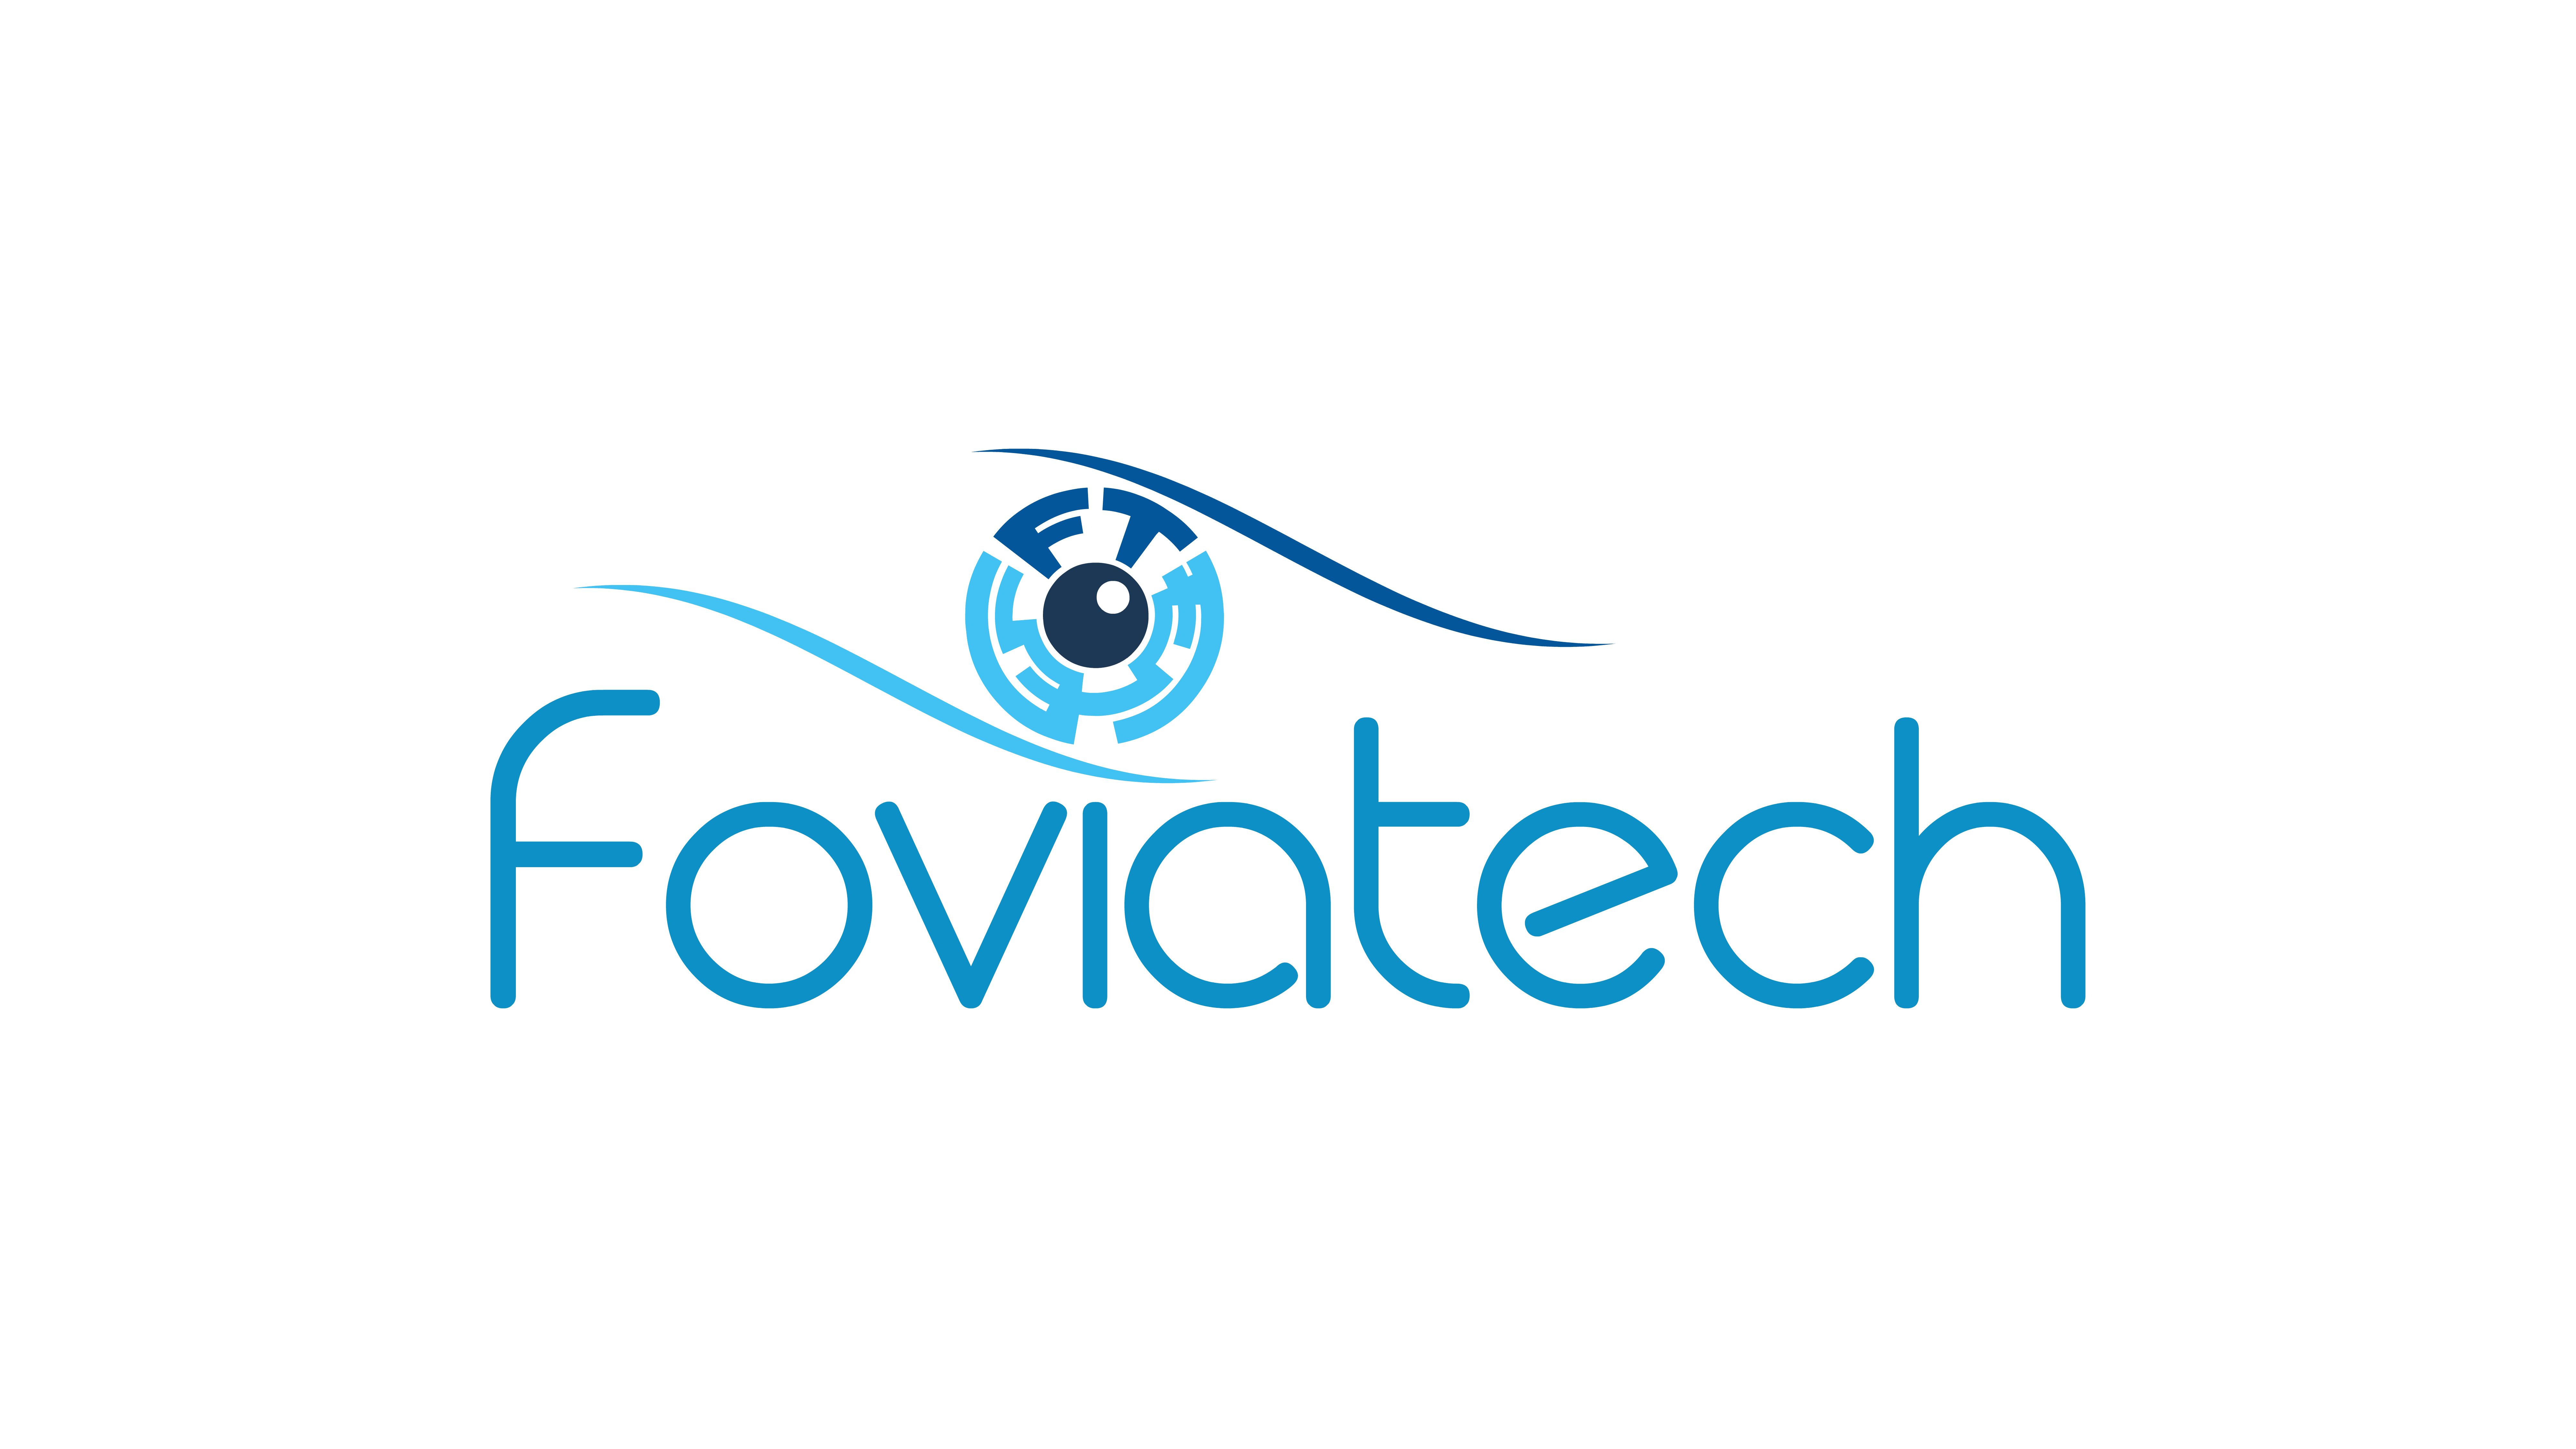 FOVIAGENX HOLDINGS LIMITED